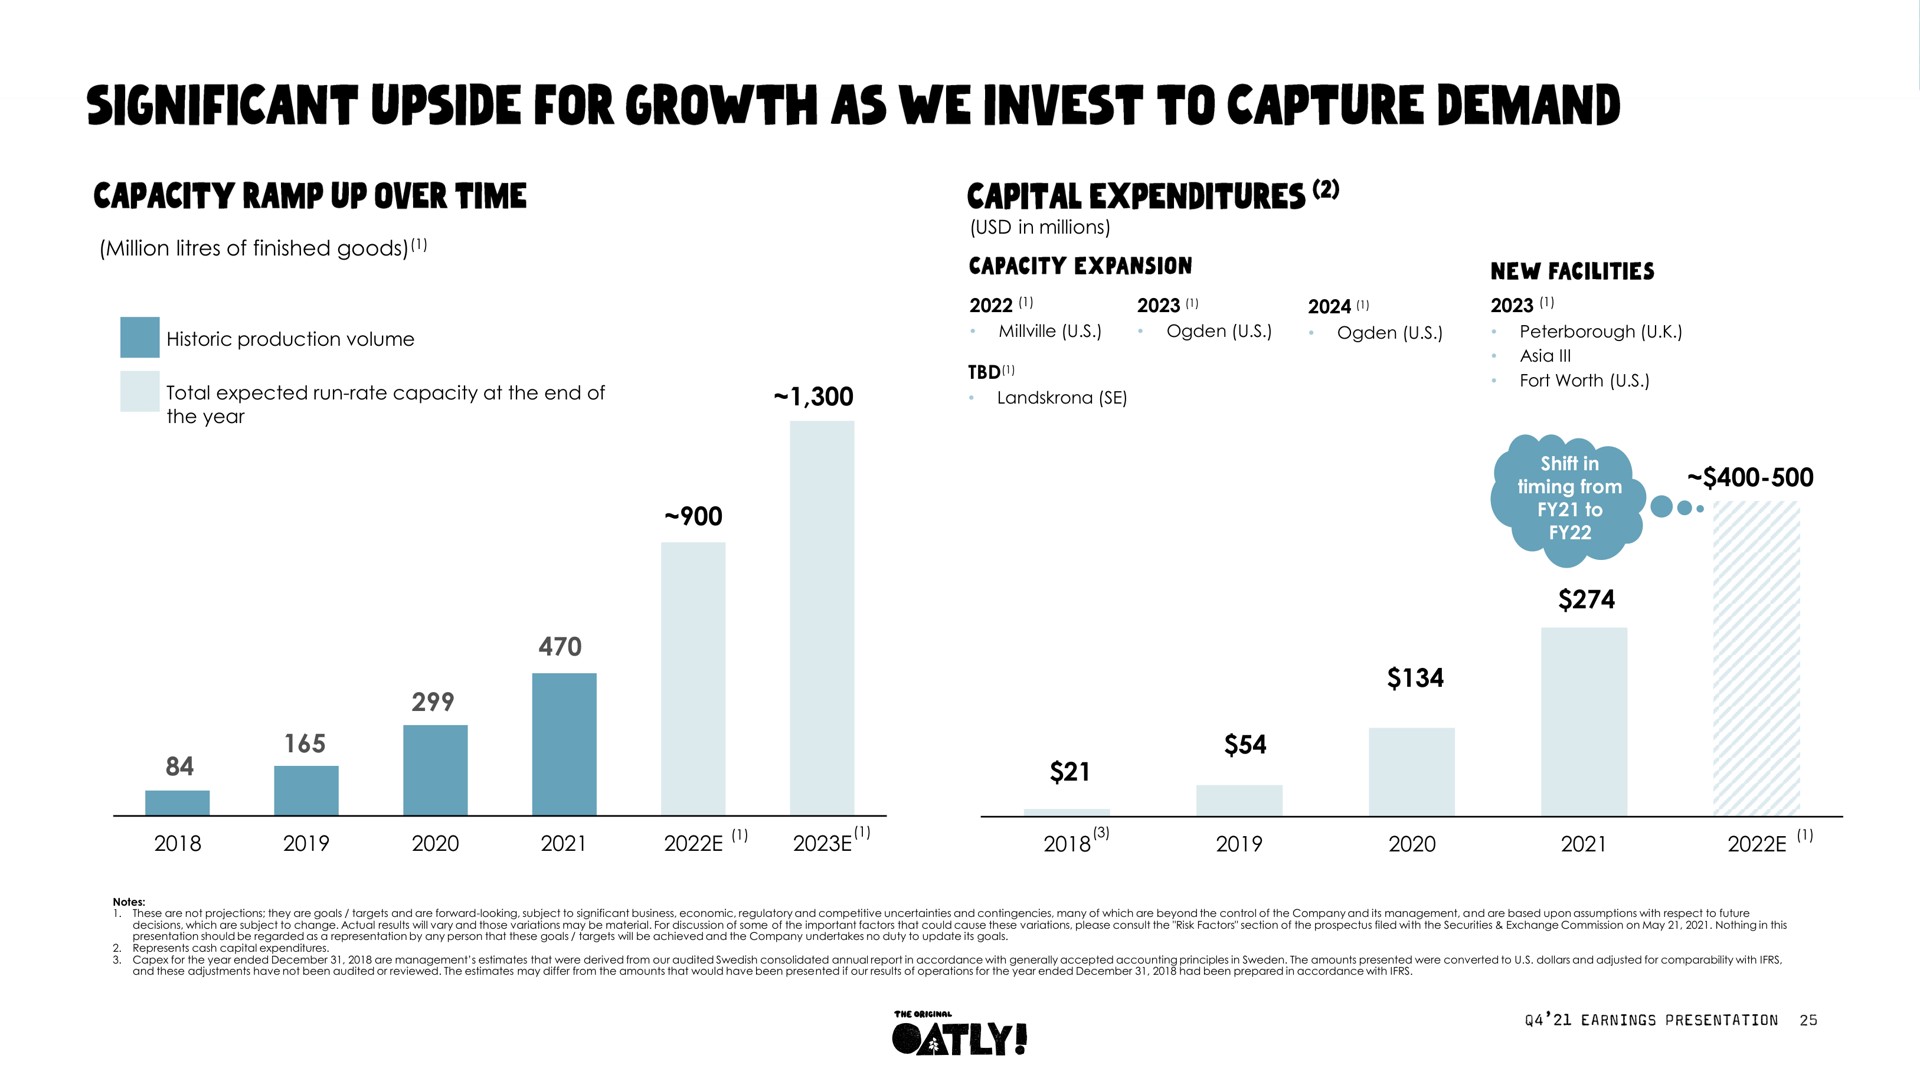 million of finished goods significant upside for growth as we invest to capture demand | Oatly